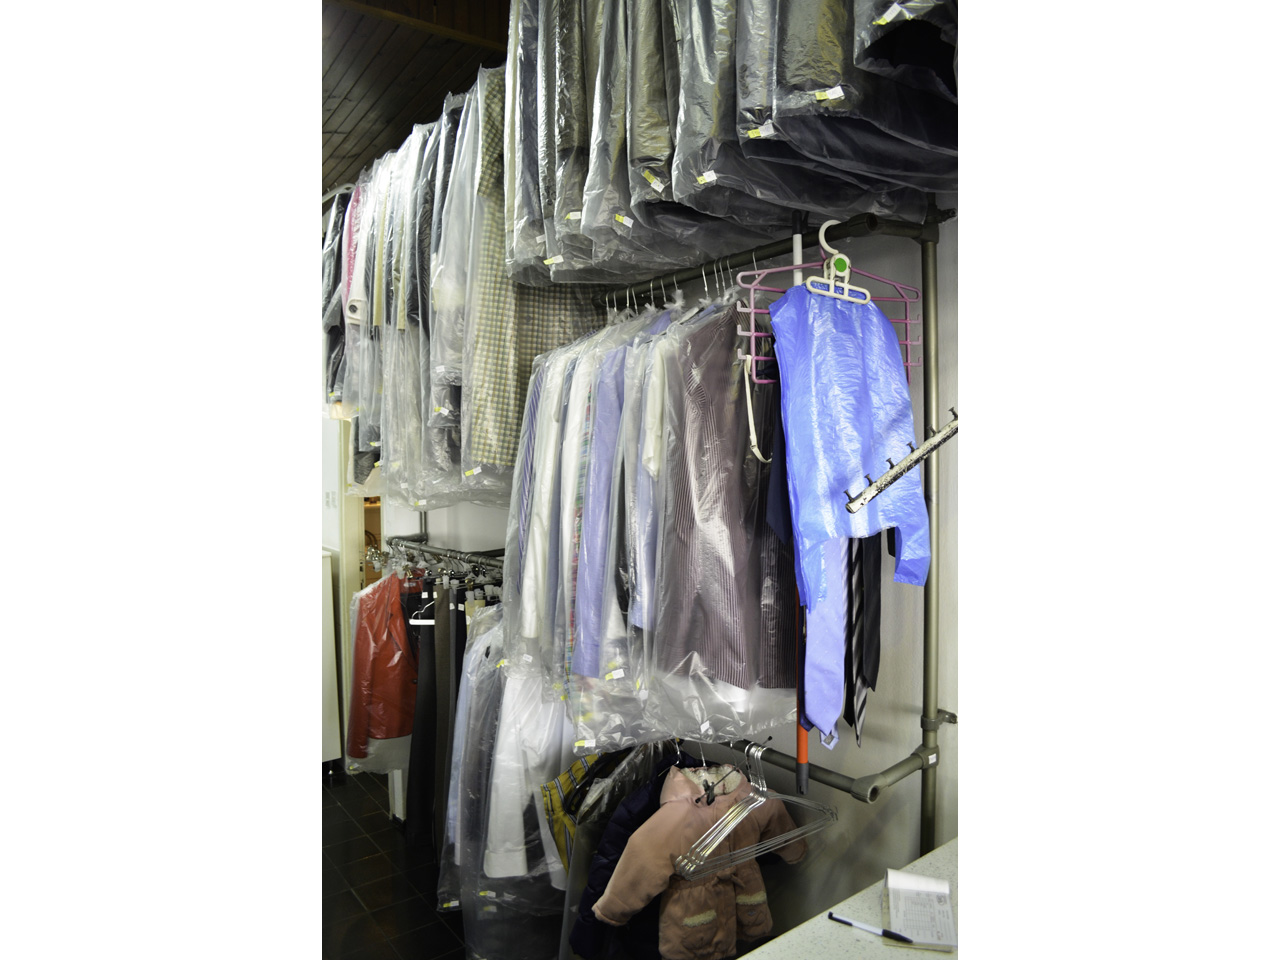 SAIS DRY CLEANING AND LAUNDRY WASH Dry-cleaning Beograd